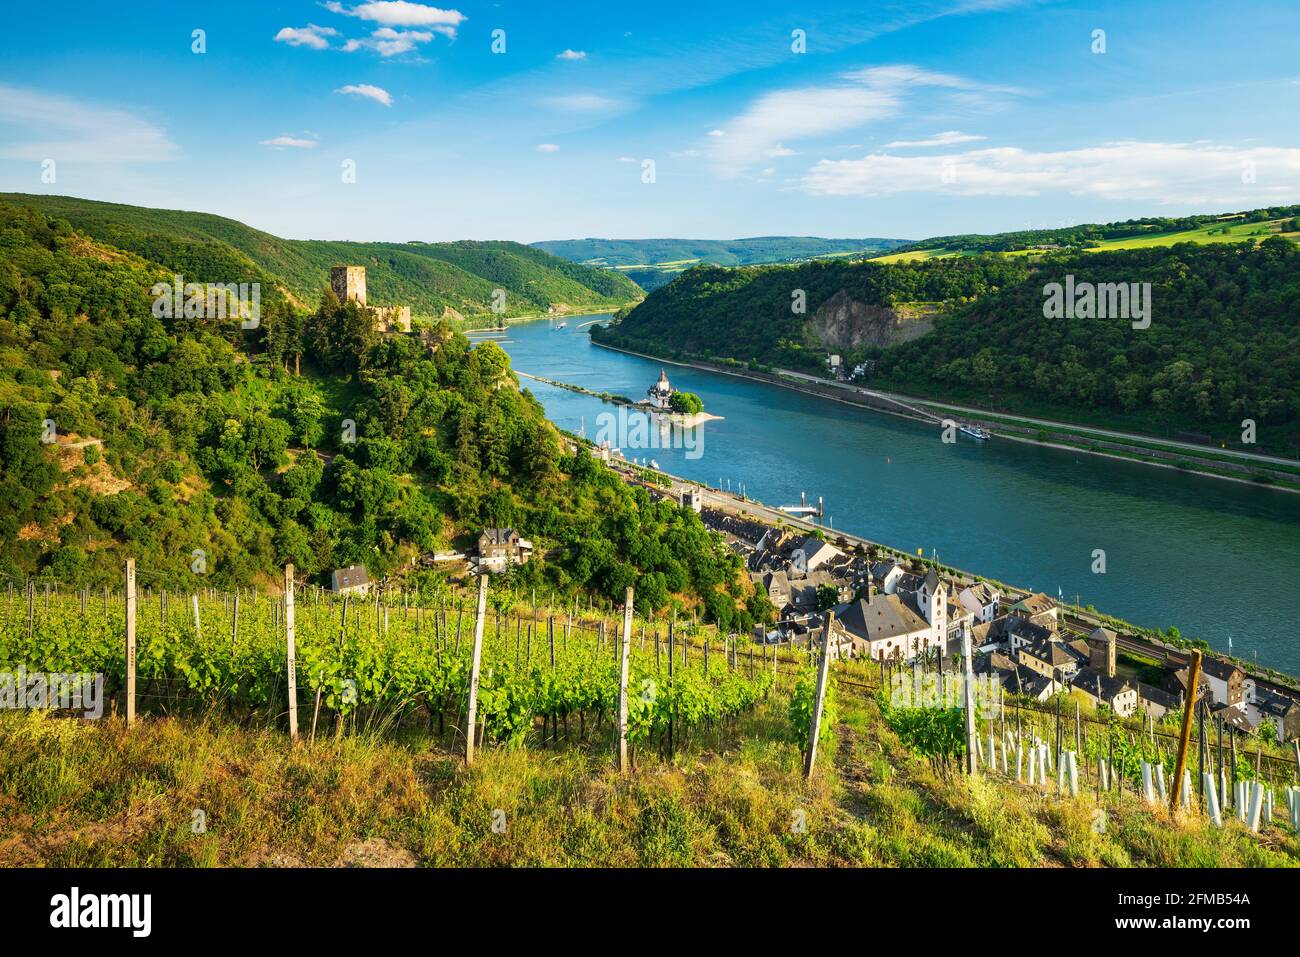 Germany, Rhineland-Palatinate, Kaub, World Heritage Upper Middle Rhine Valley, view of Gutenfels Castle on the Rhine, Pfalzgrafenstein Castle in the back Stock Photo